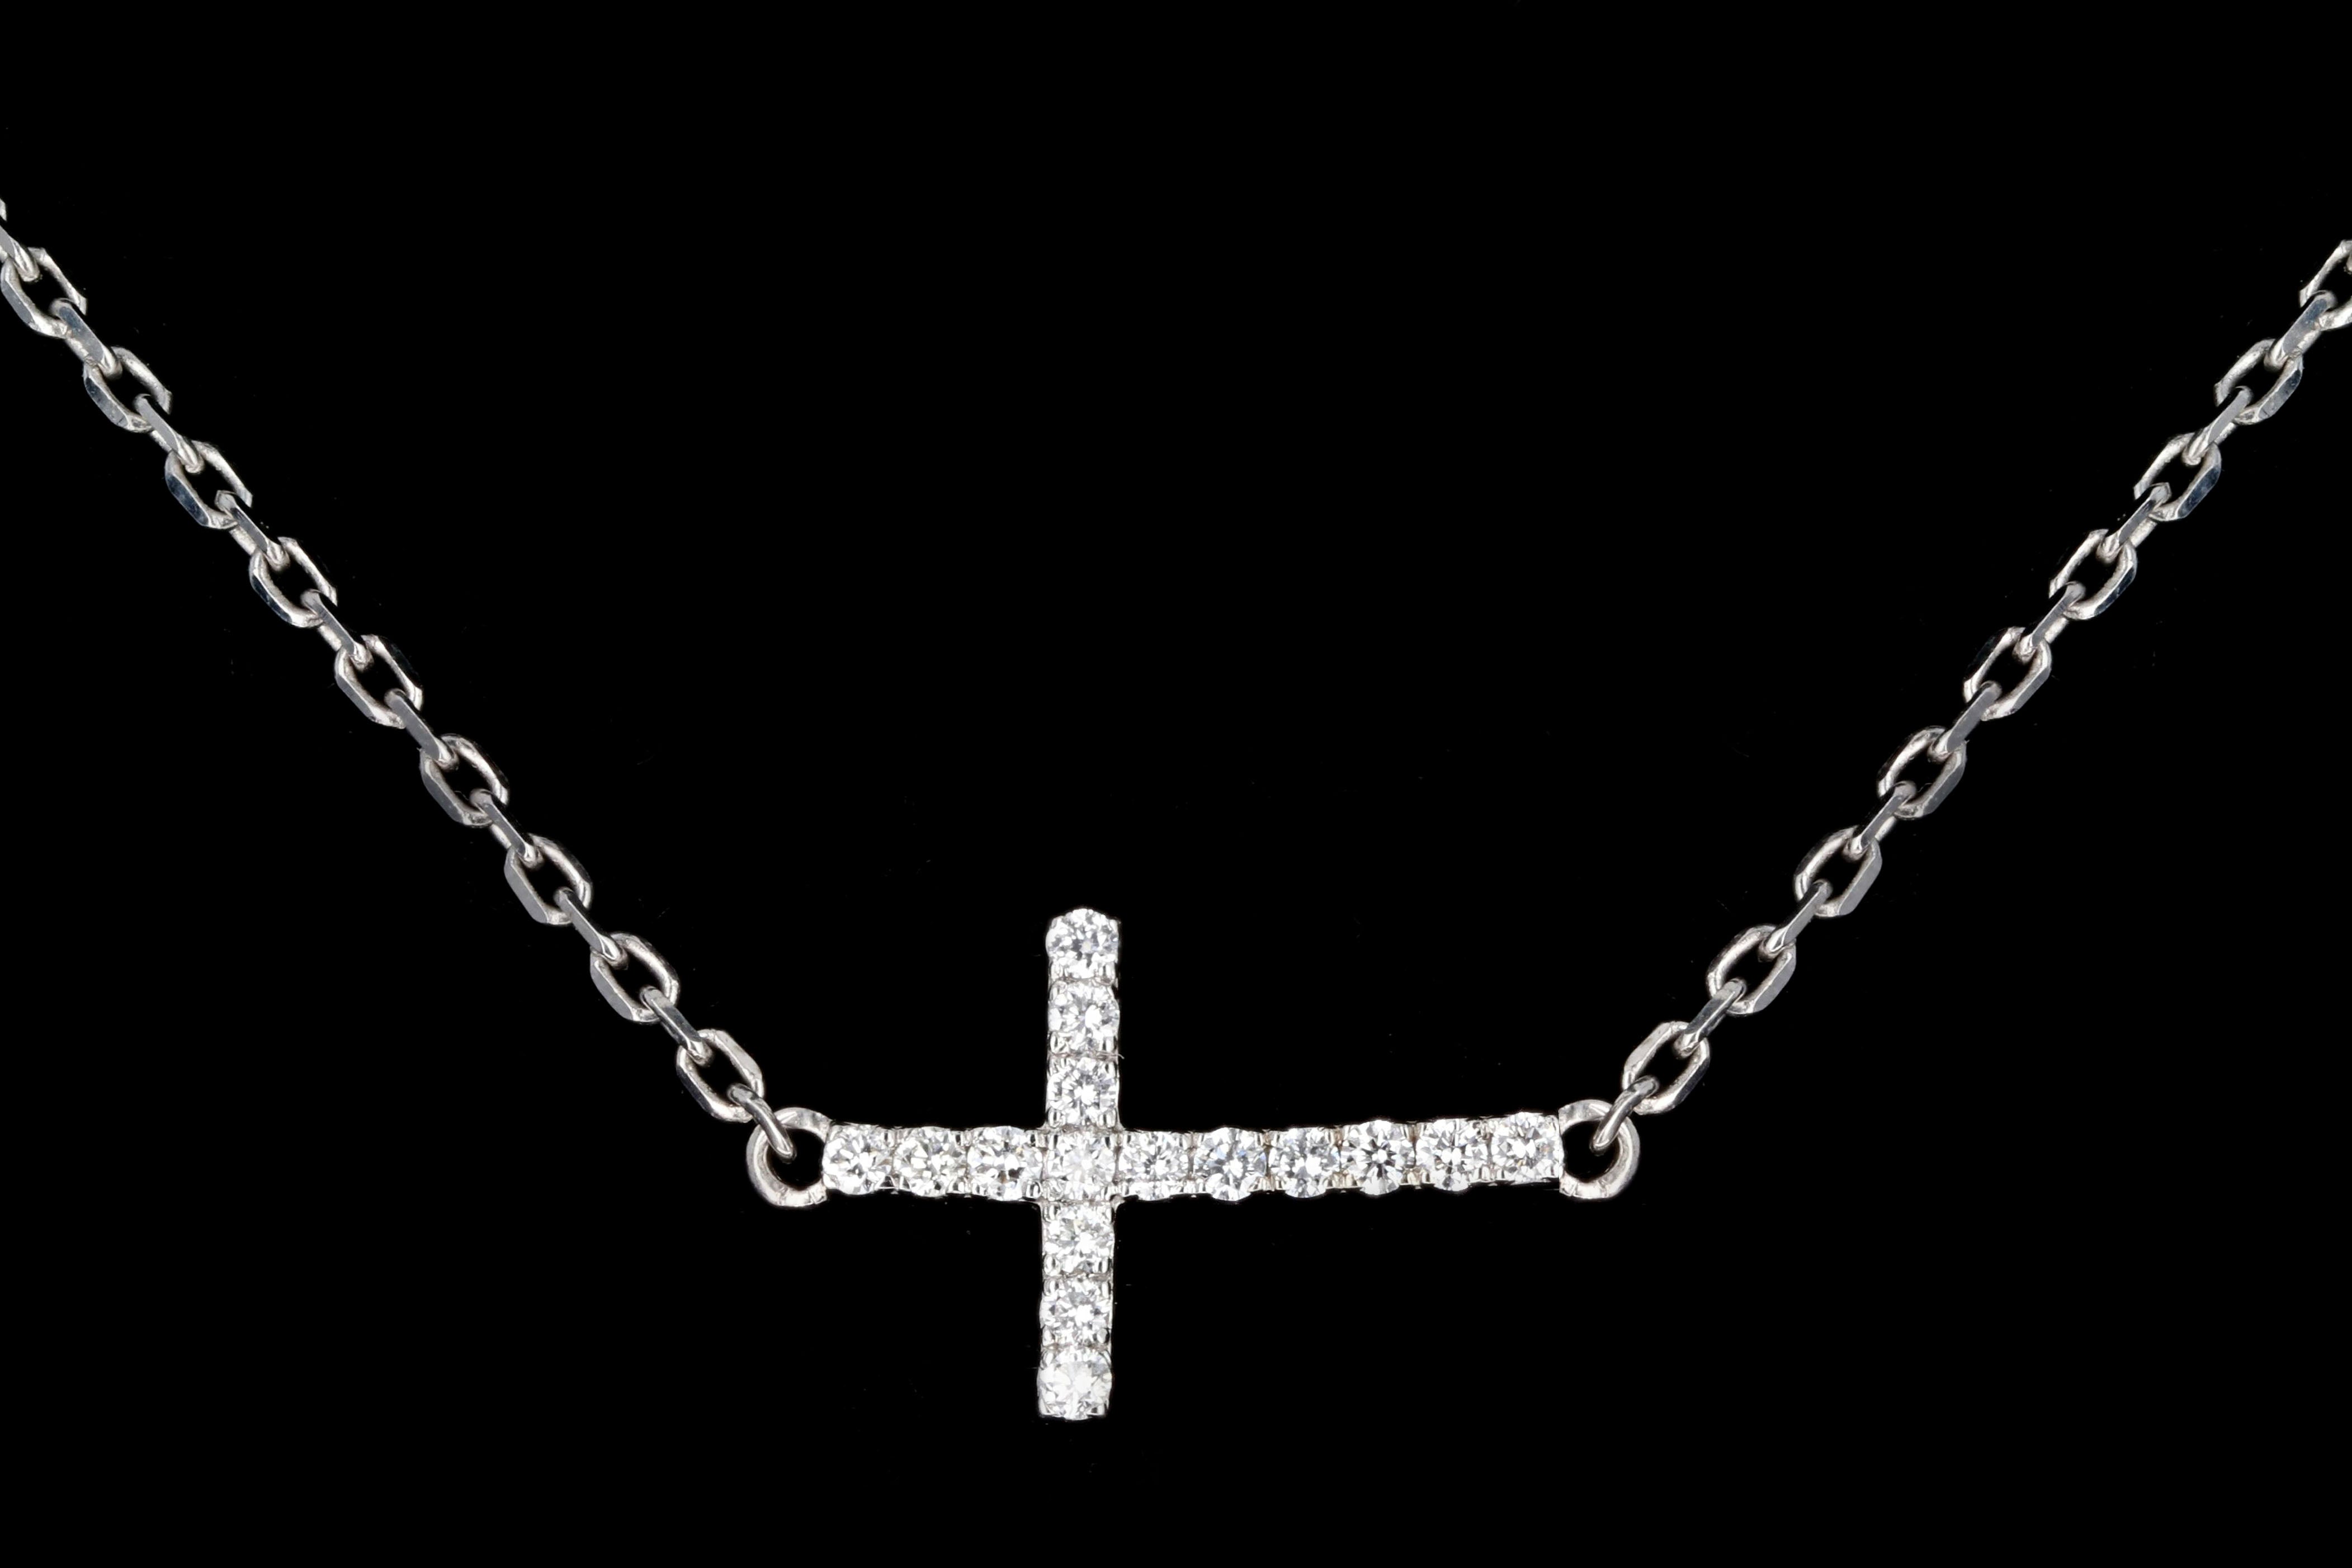 12 Carat Riviera Diamond Necklace For Sale at 1stDibs | 12 carat diamond  necklace, 12 carat diamond tennis necklace, 12 carat tennis necklace